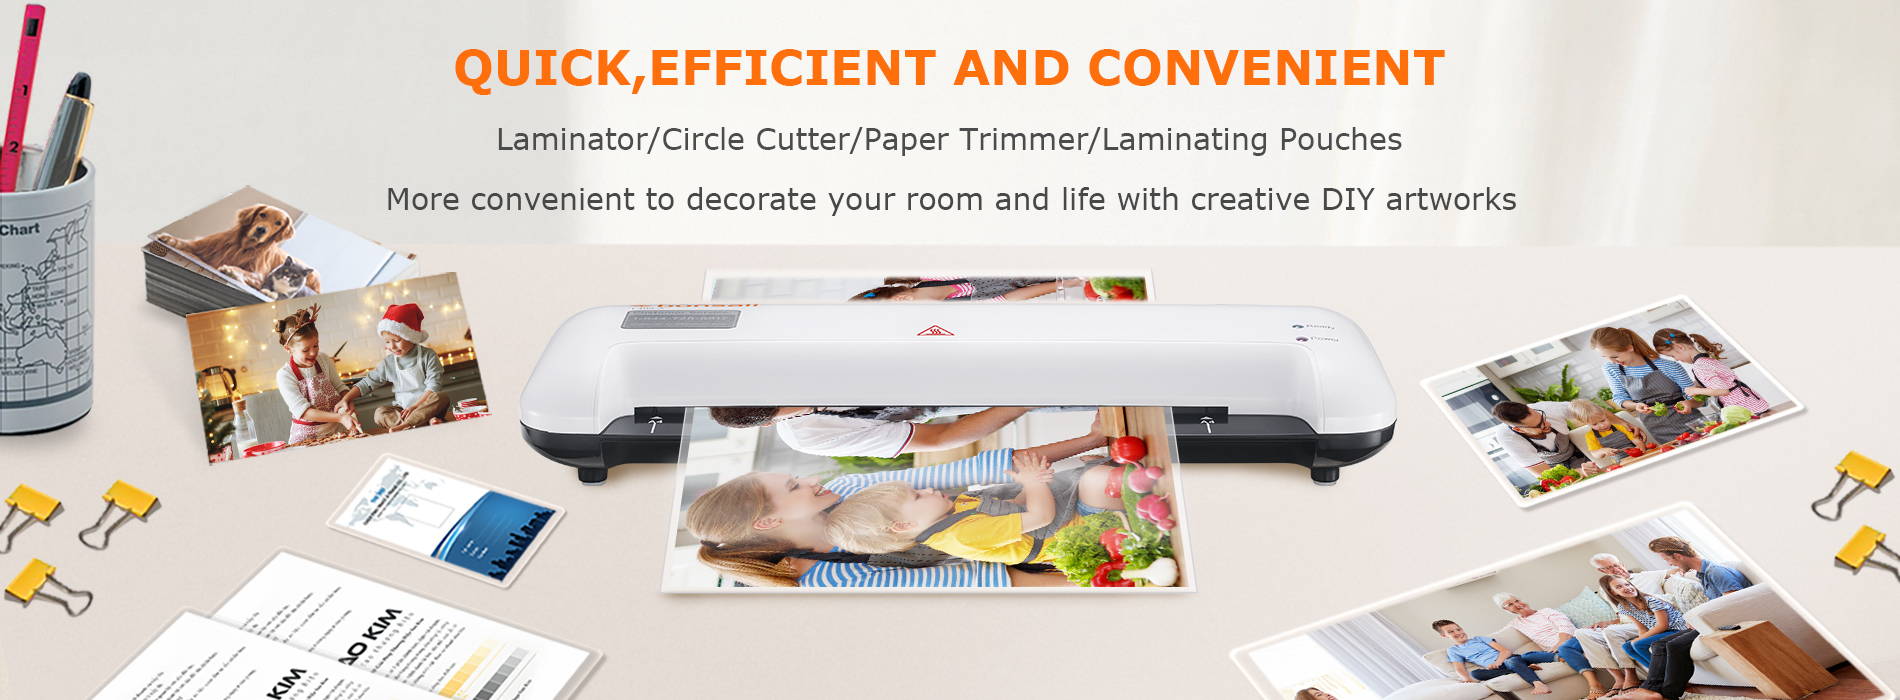 QUICK,EFFICIENT AND CONVENIENT Laminator/Circle Cutter/Paper Trimmer/Laminating Pouches More convenient to decorate your room and life with creative DIY artworks